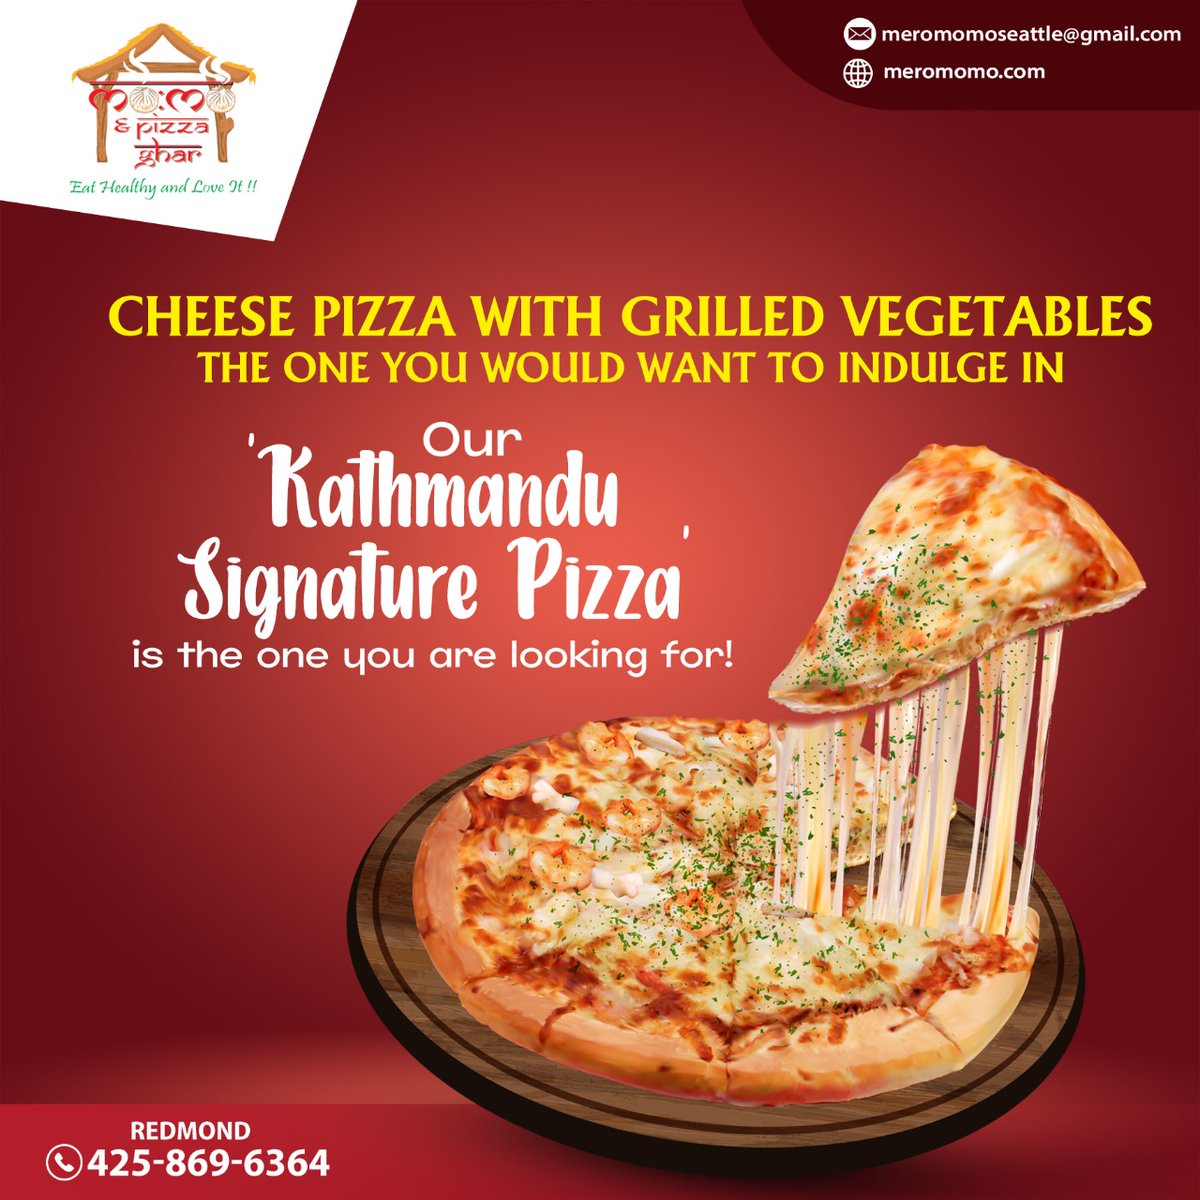 Cheese pizza with grilled vegetables the one you would want to indulge in. Our 'Kathmandu Signat